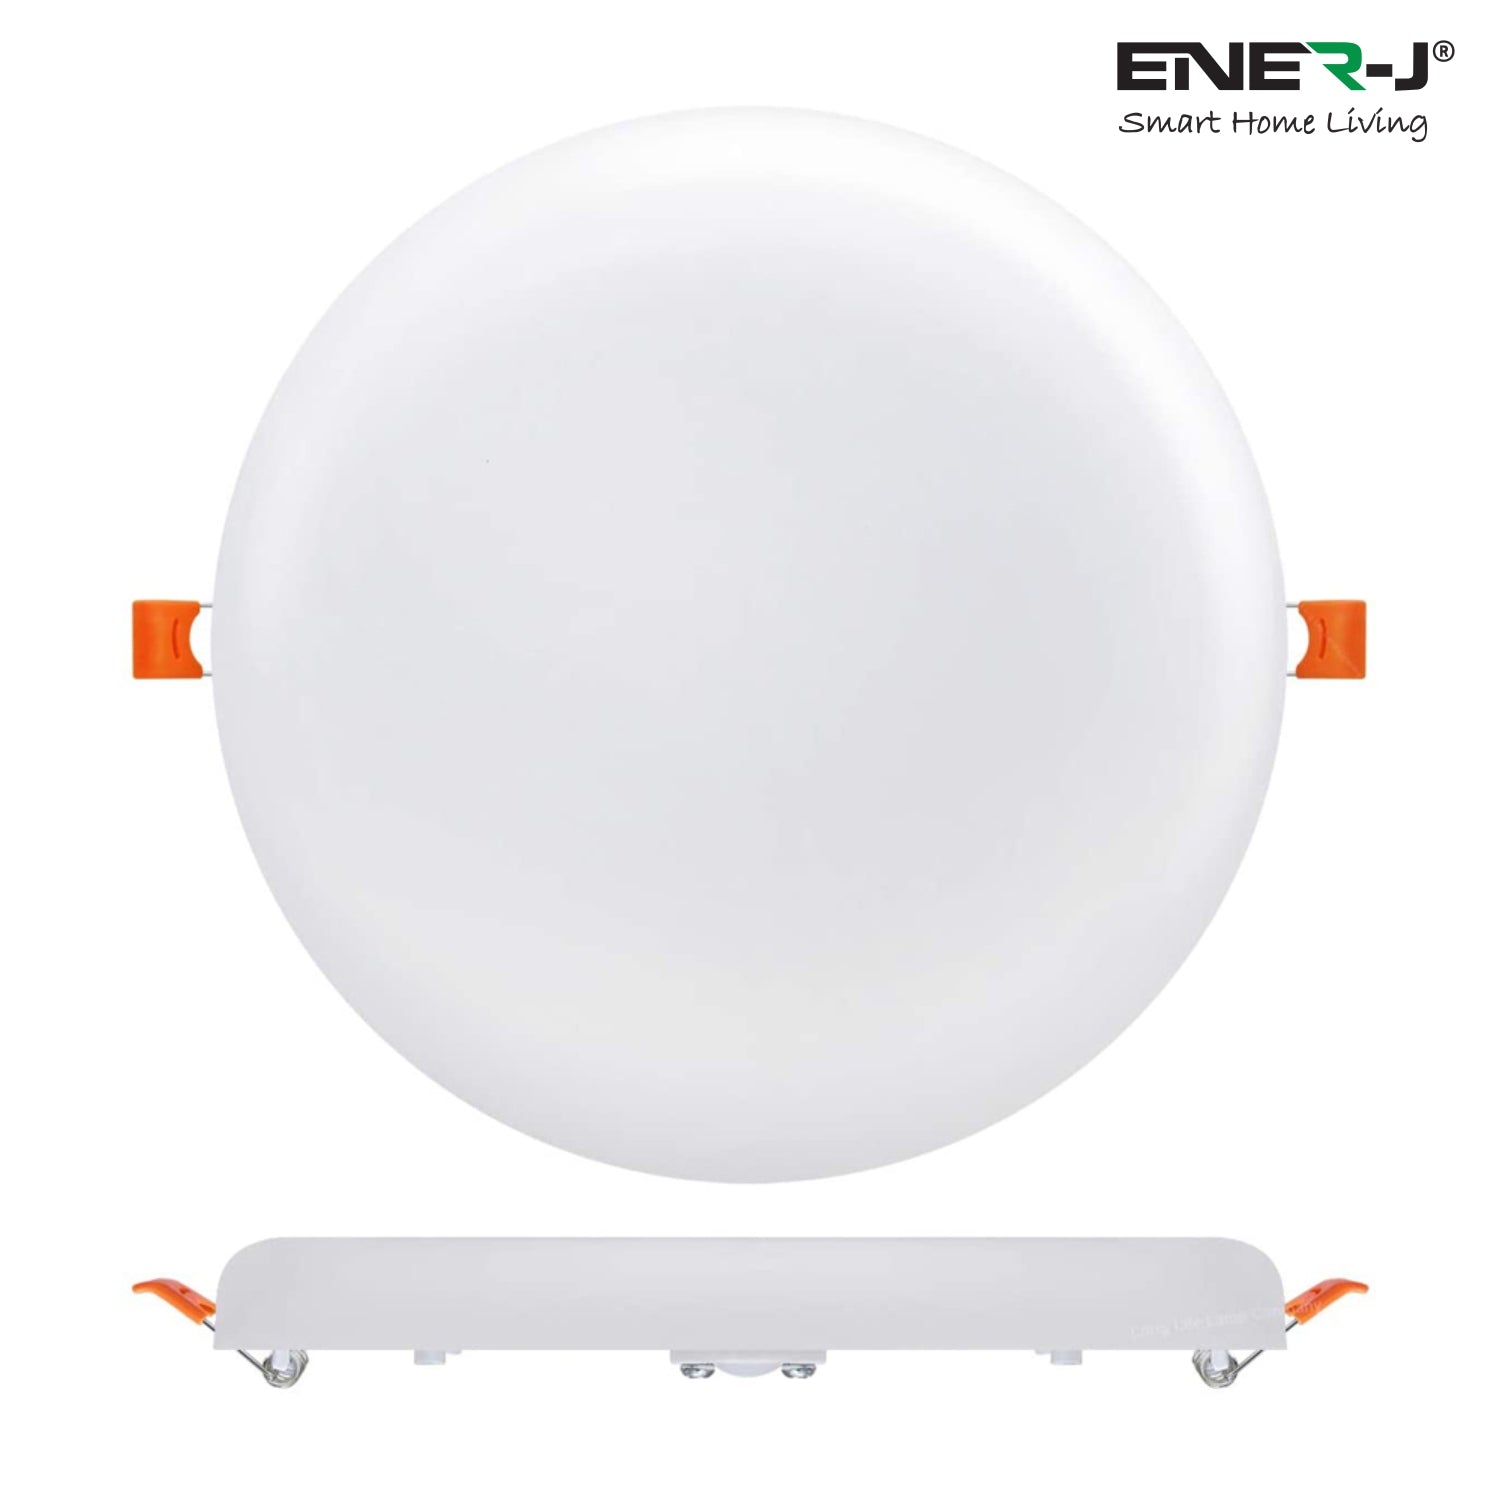 Pack of 4 18W Frameless Recessed-Surface Super LED Panel Downlights, 6000K, 105mm, Round, 2 Years Warranty